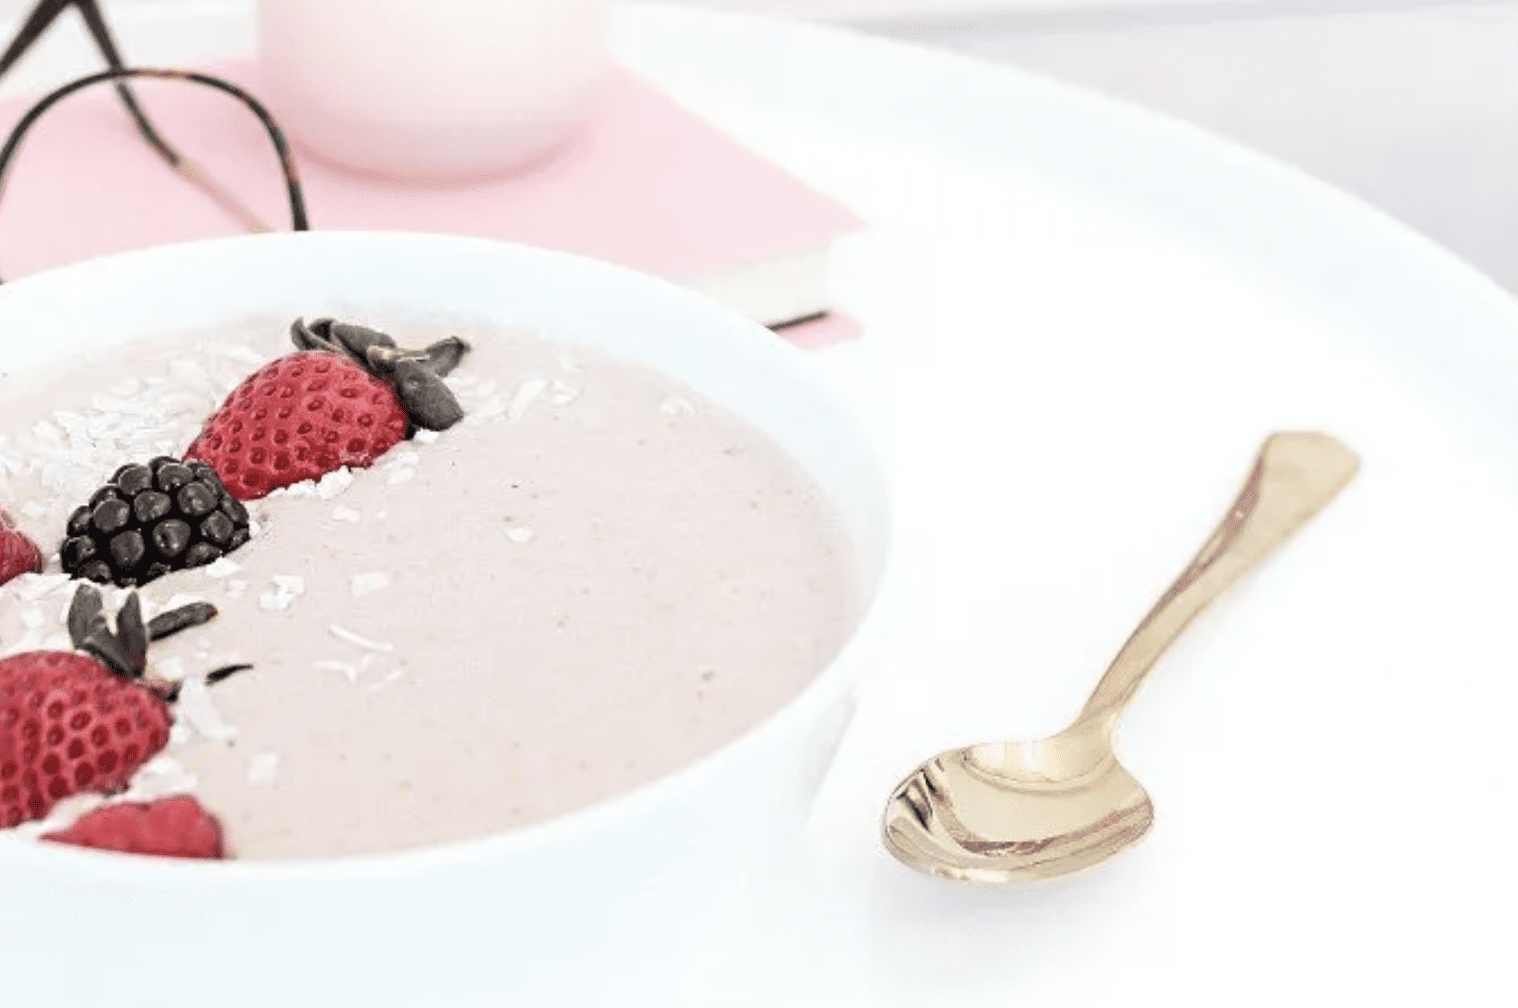 Smoothie Bowls: Why are they the latest rage?